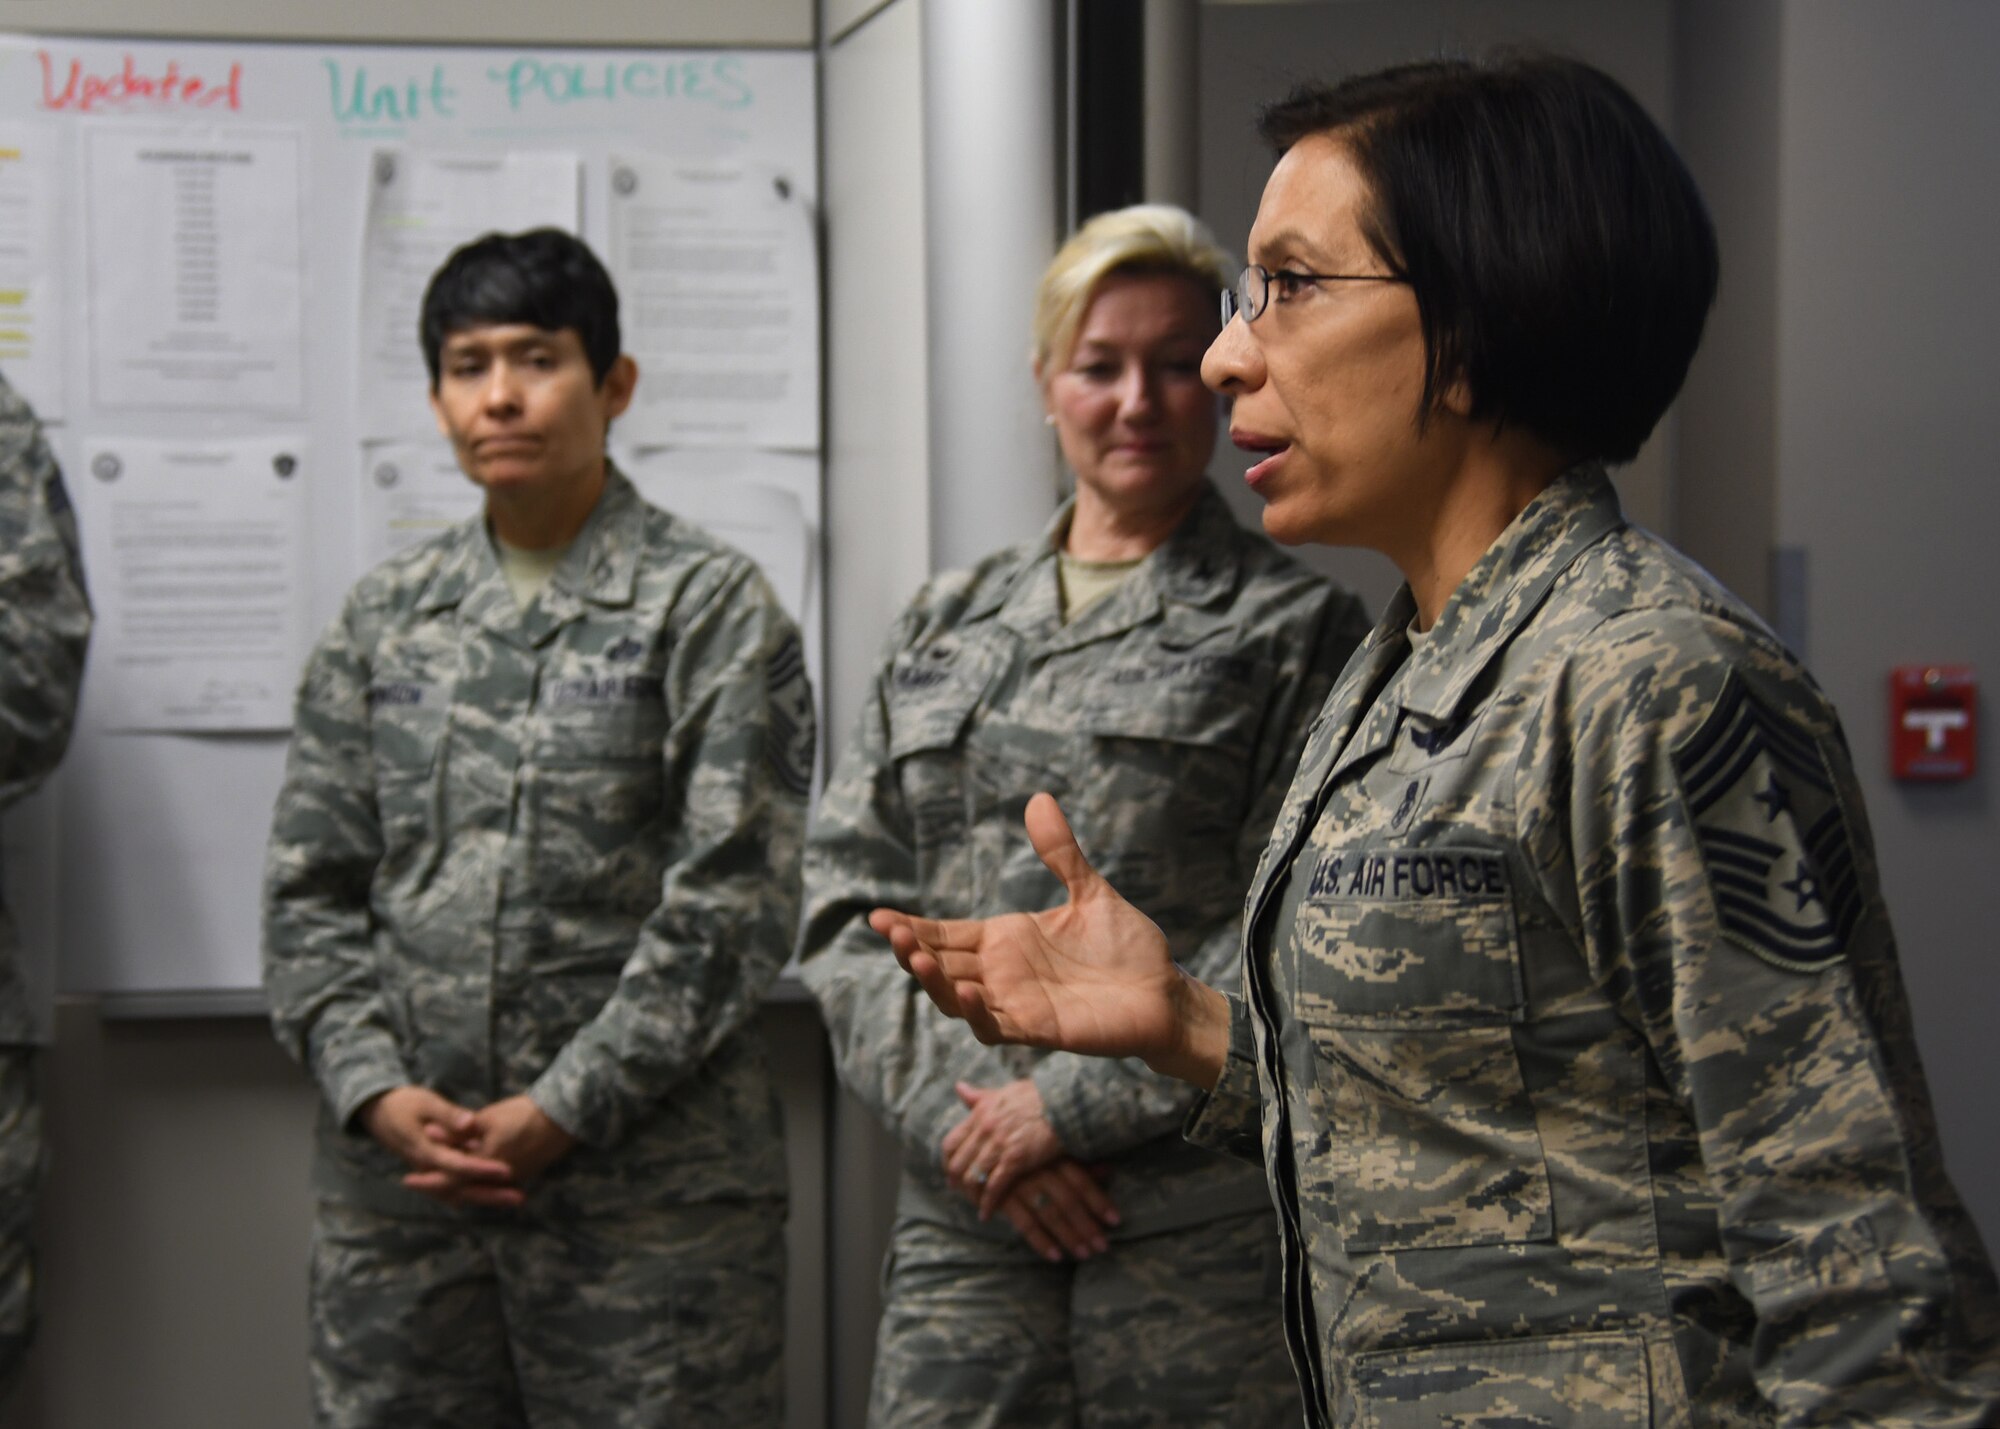 Chief Master Sgt. Ericka Kelly, Air Force Reserve Command command chief master sergeant, speaks to the 94th Aeromedical Staging Squadron at Dobbins Air Reserve Base, Ga, Jan. 7, 2018. Kelly visited Dobbins to tour the base and visit the units, as well as host question and answer sessions. (U.S. Air Force photo by Staff Sergeant Miles Wilson)